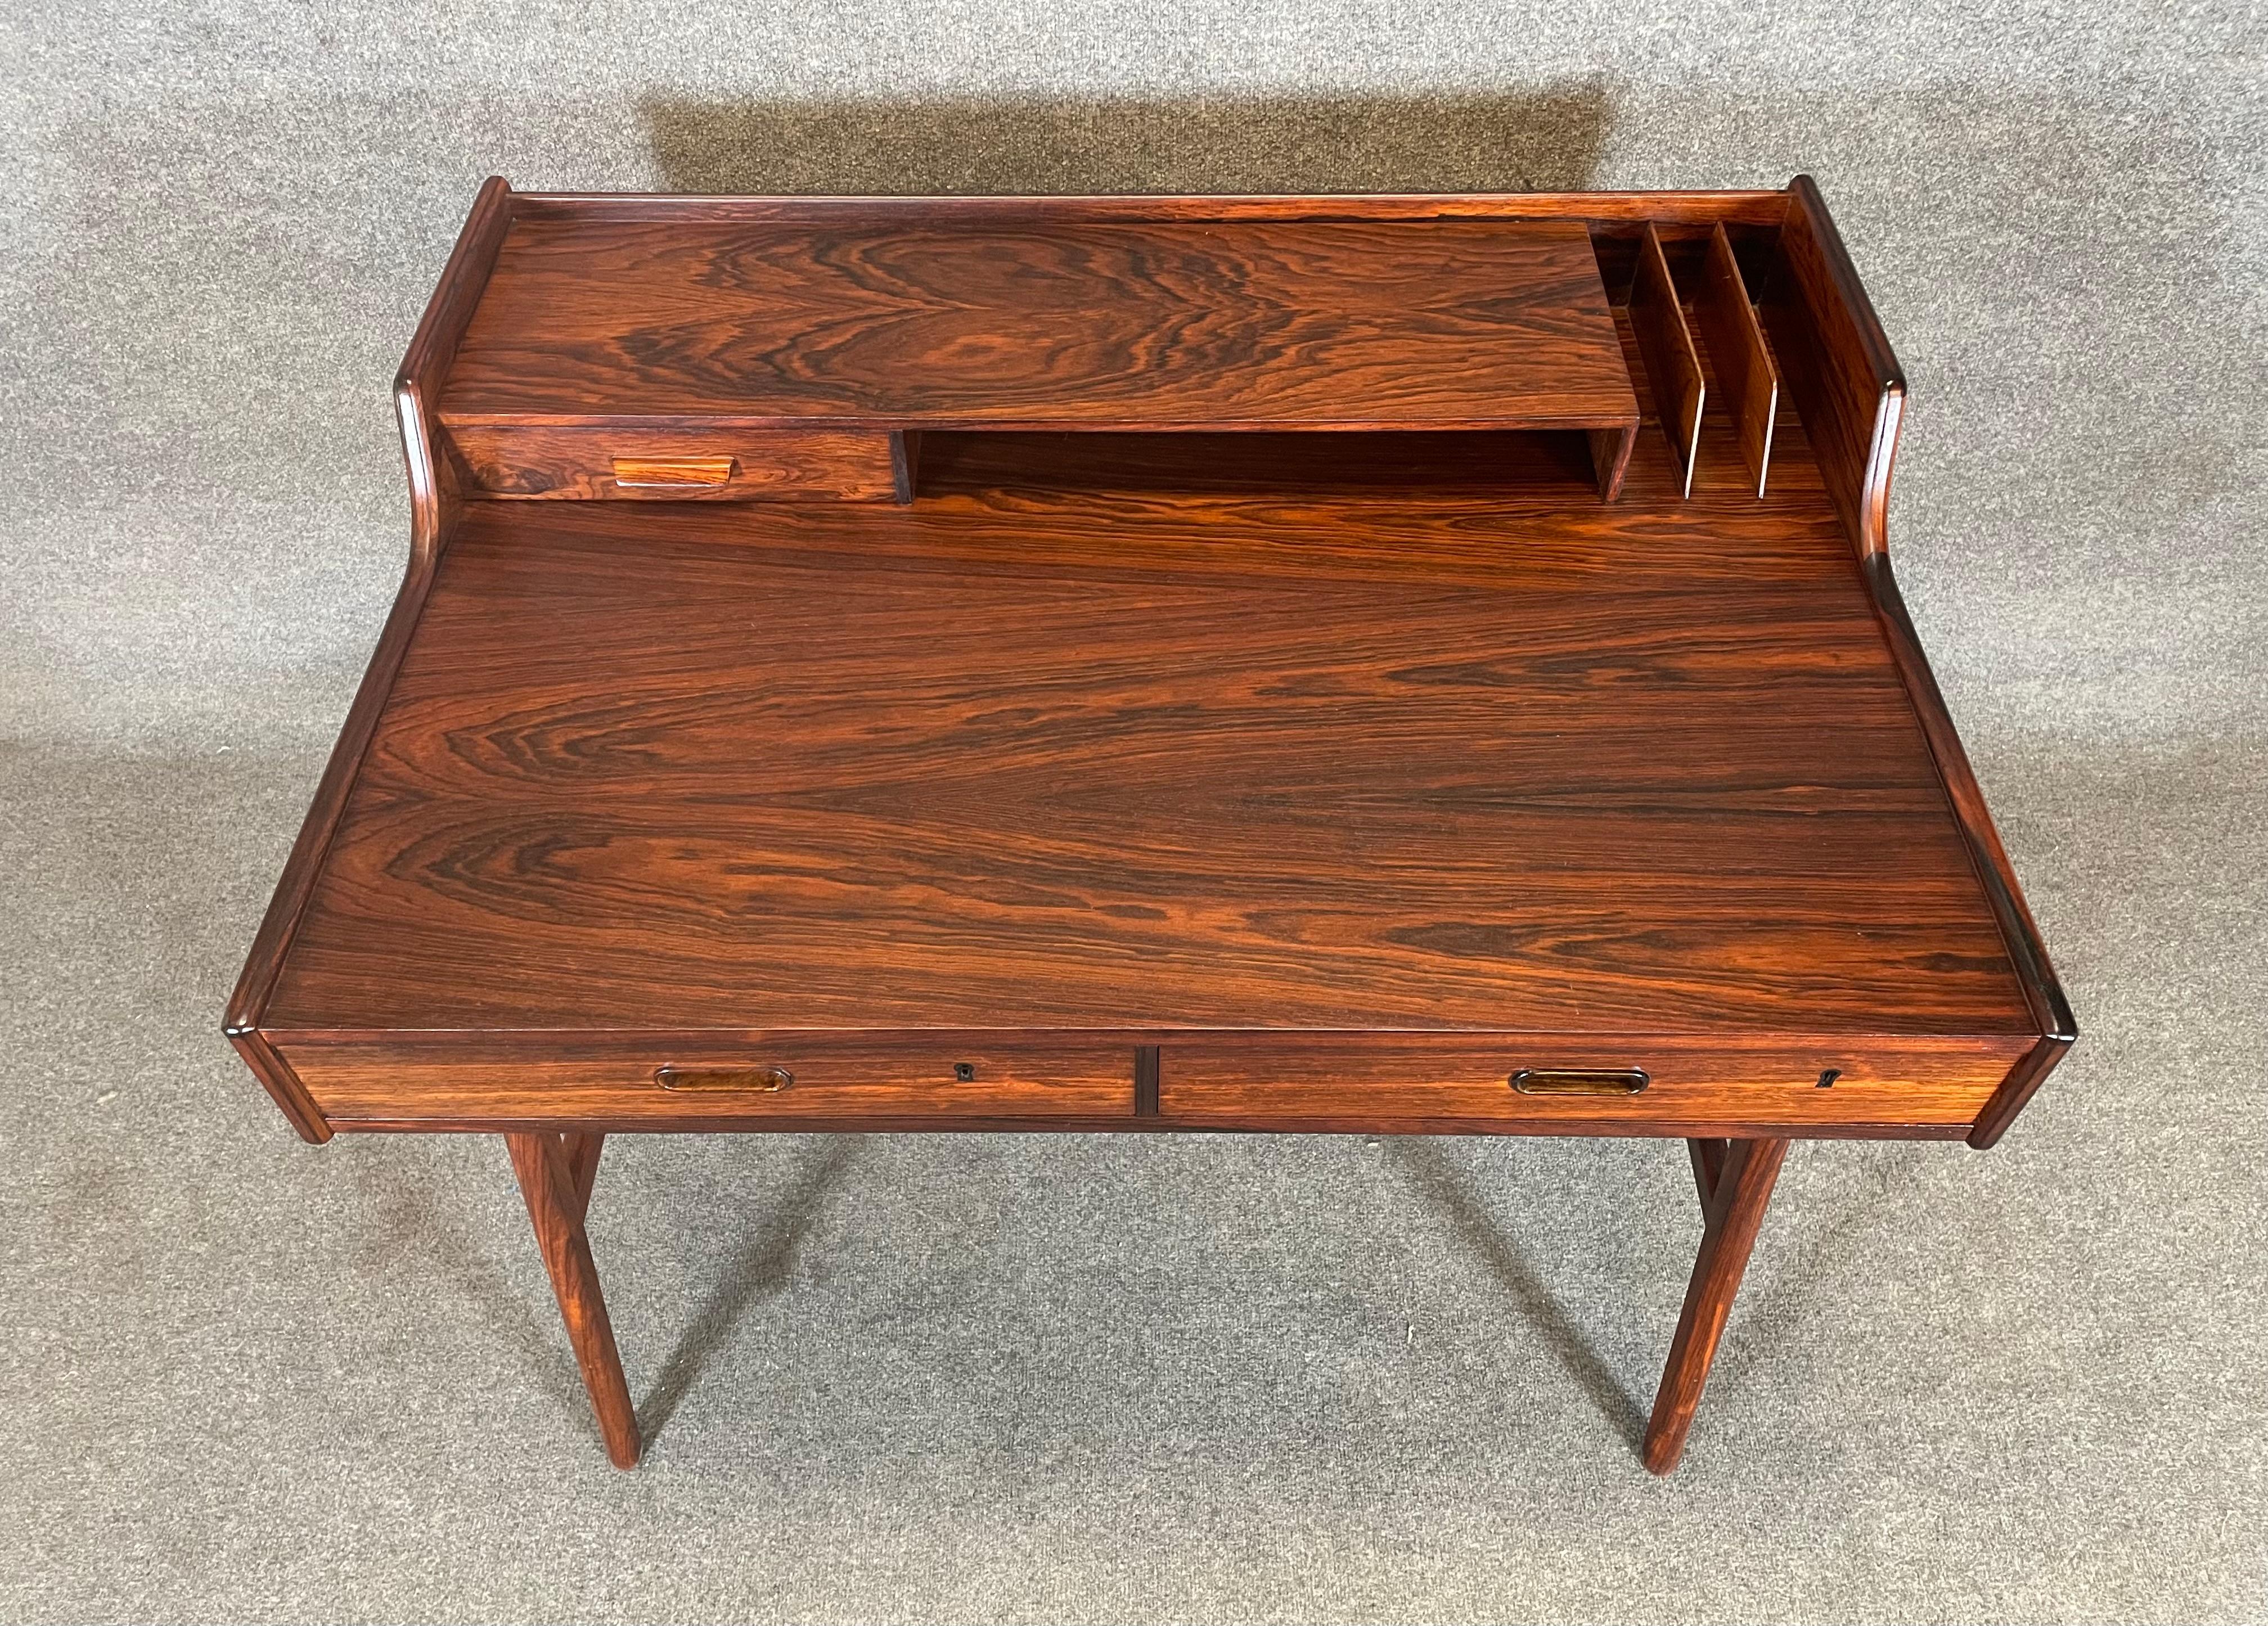 Here is the sought after scandinavian modern Model 56 desk in rosewood designed by Arne Wall Iversen and manufactured by Vinde Mobelfabrik in Denmark in the 1960's.
This exquisite desk, recently imported from Europe to California before its